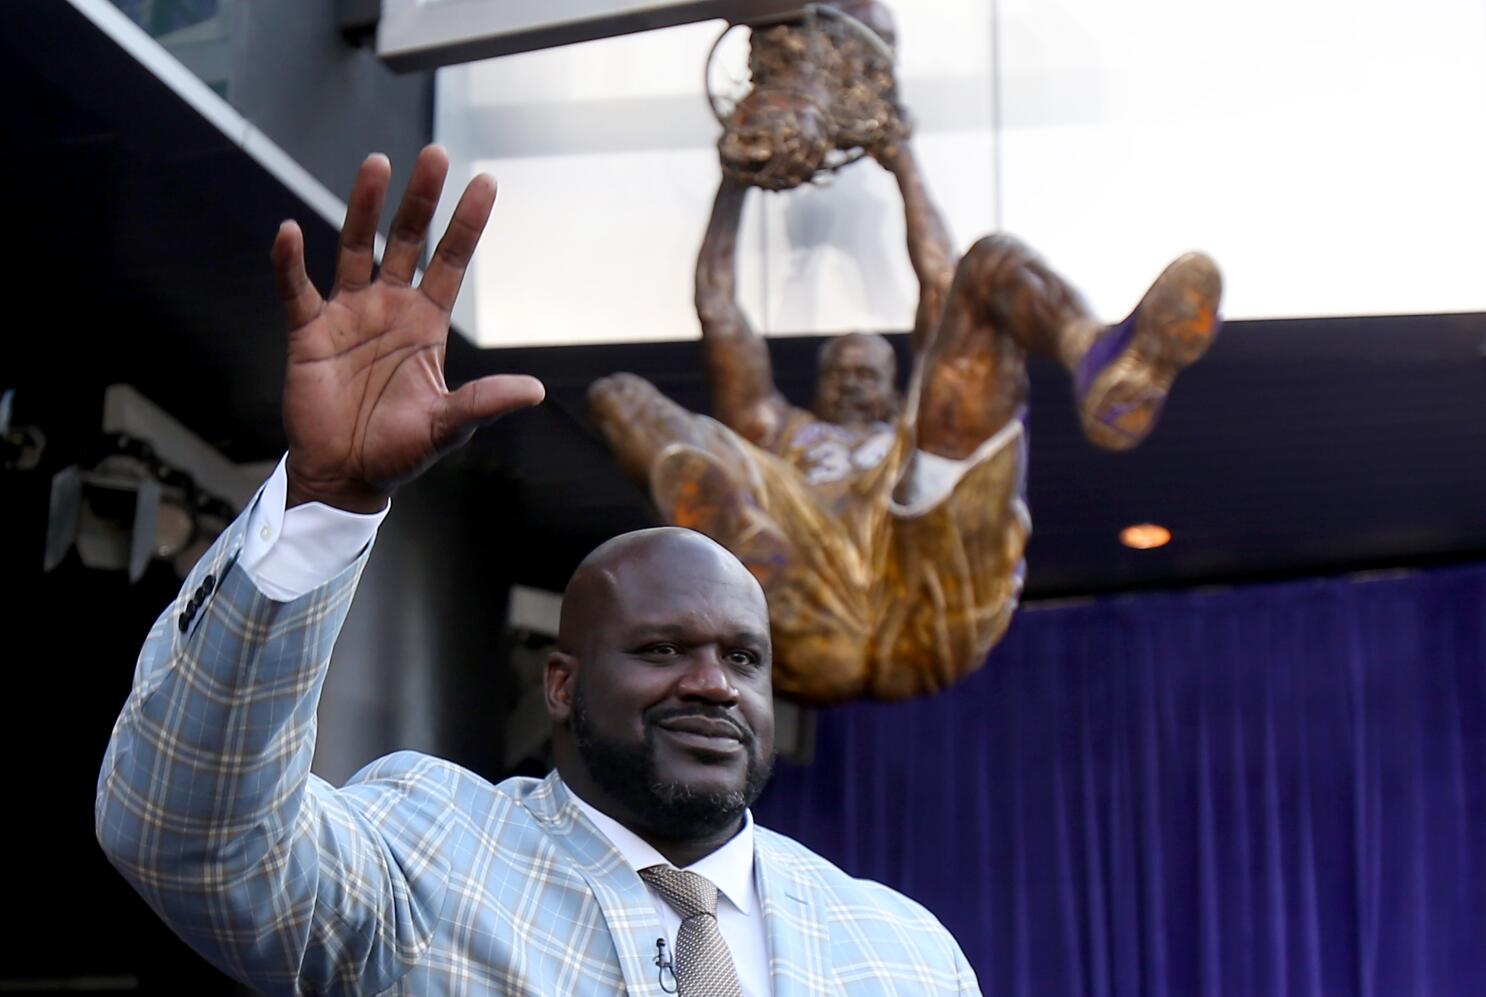 Shaquille O'Neal in the Hall of Fame: 5 reasons there will never